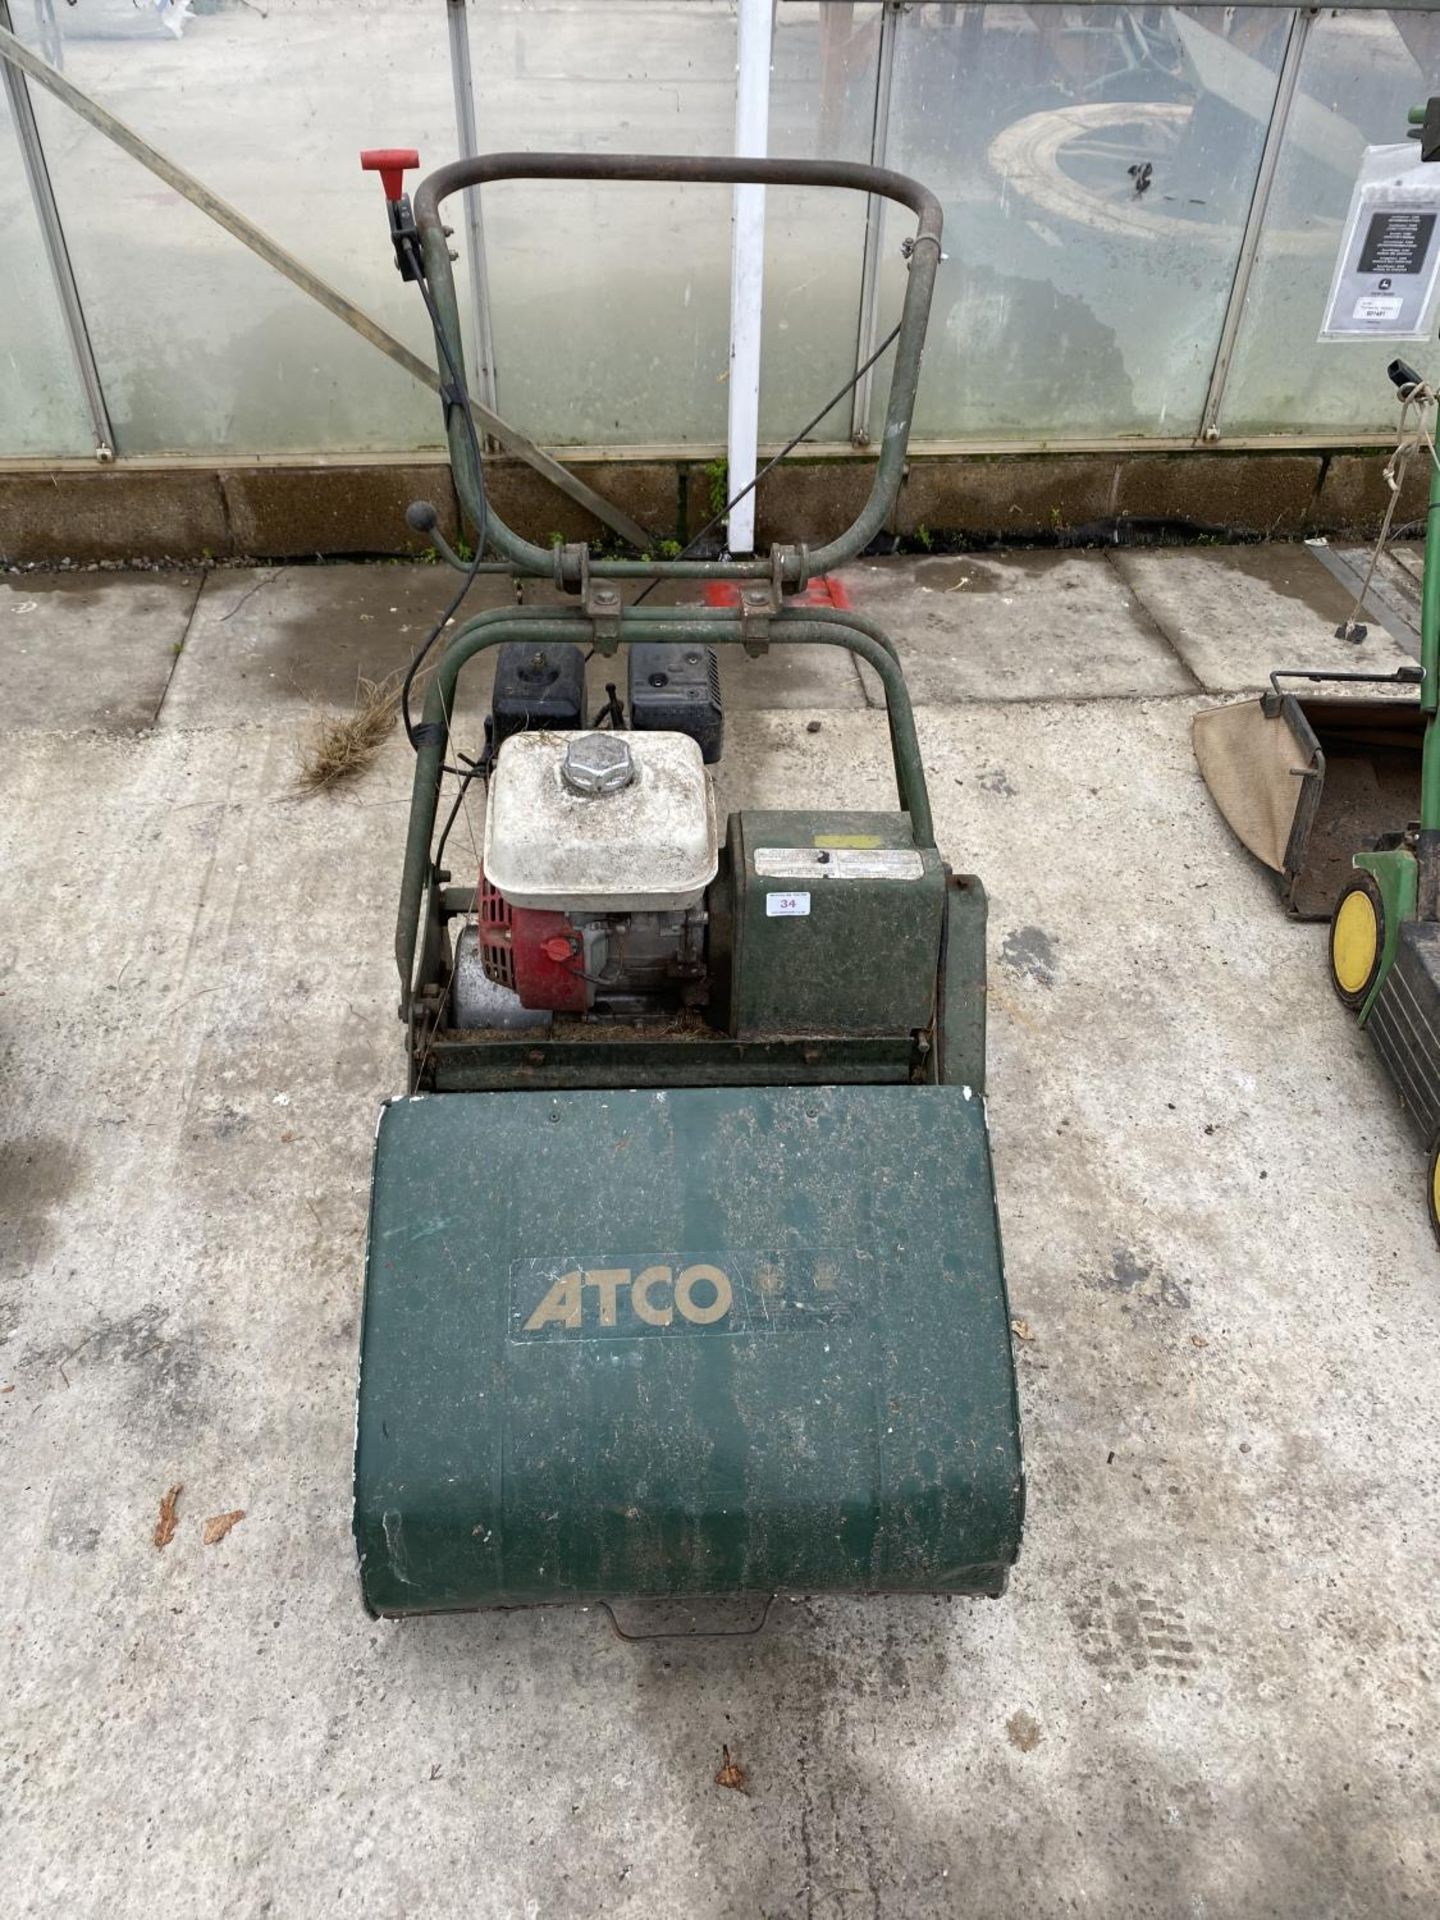 AN ATCO 20" LAWN MOWER WITH HONDA GX 160 ENGINE FROM LOCAL CRICKET CLUB NO VAT - PROCEEDS TO CHARITY